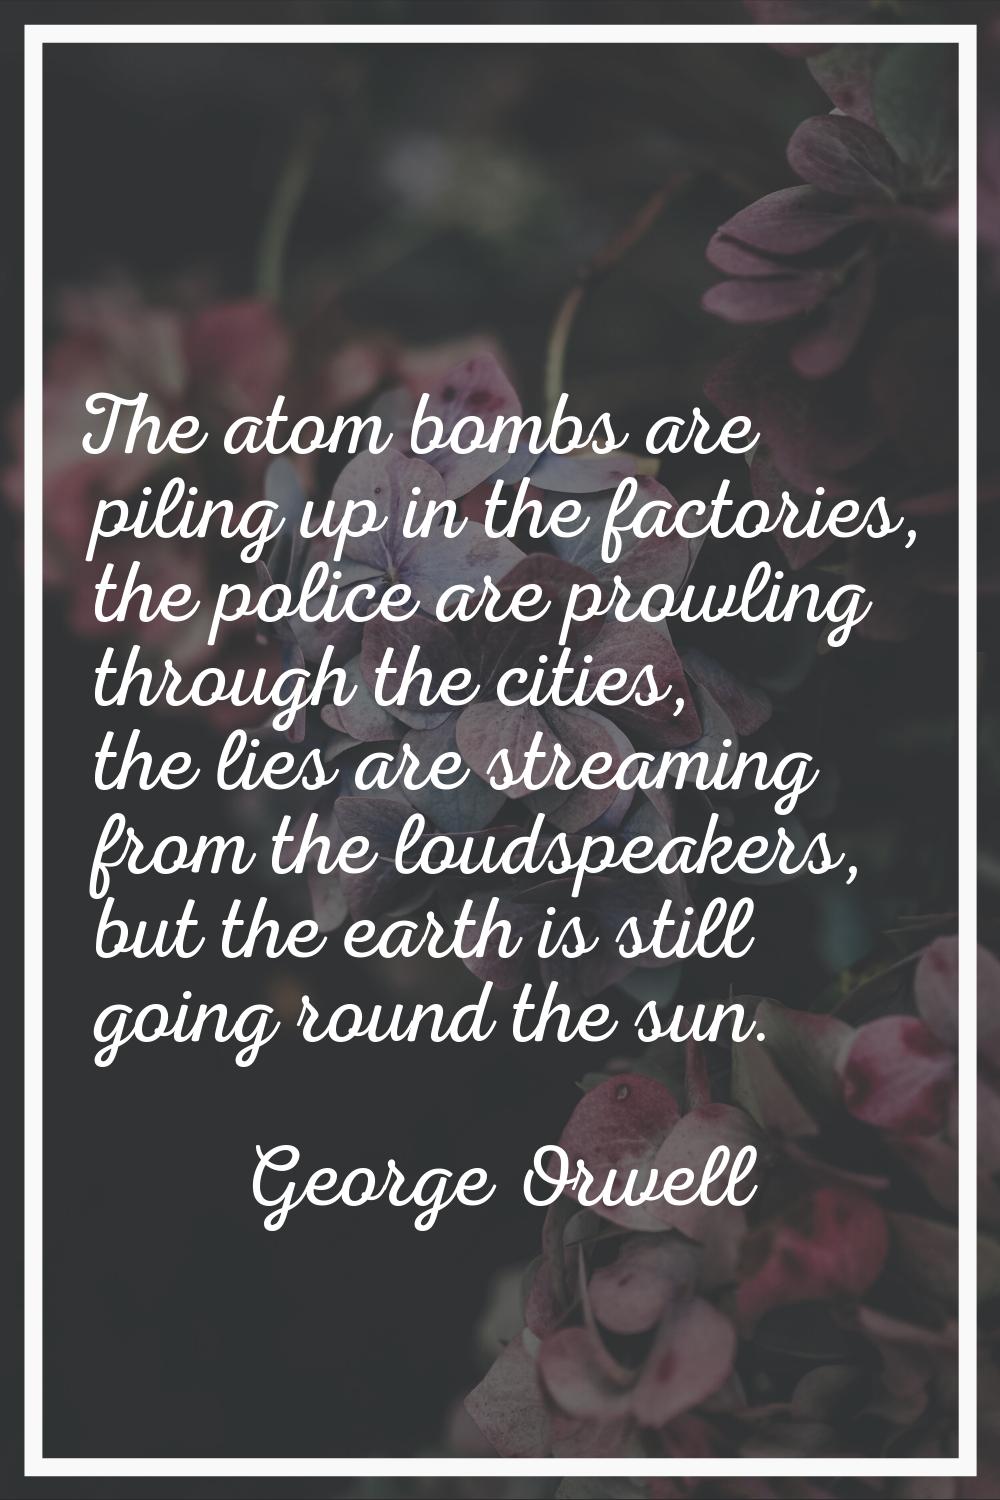 The atom bombs are piling up in the factories, the police are prowling through the cities, the lies